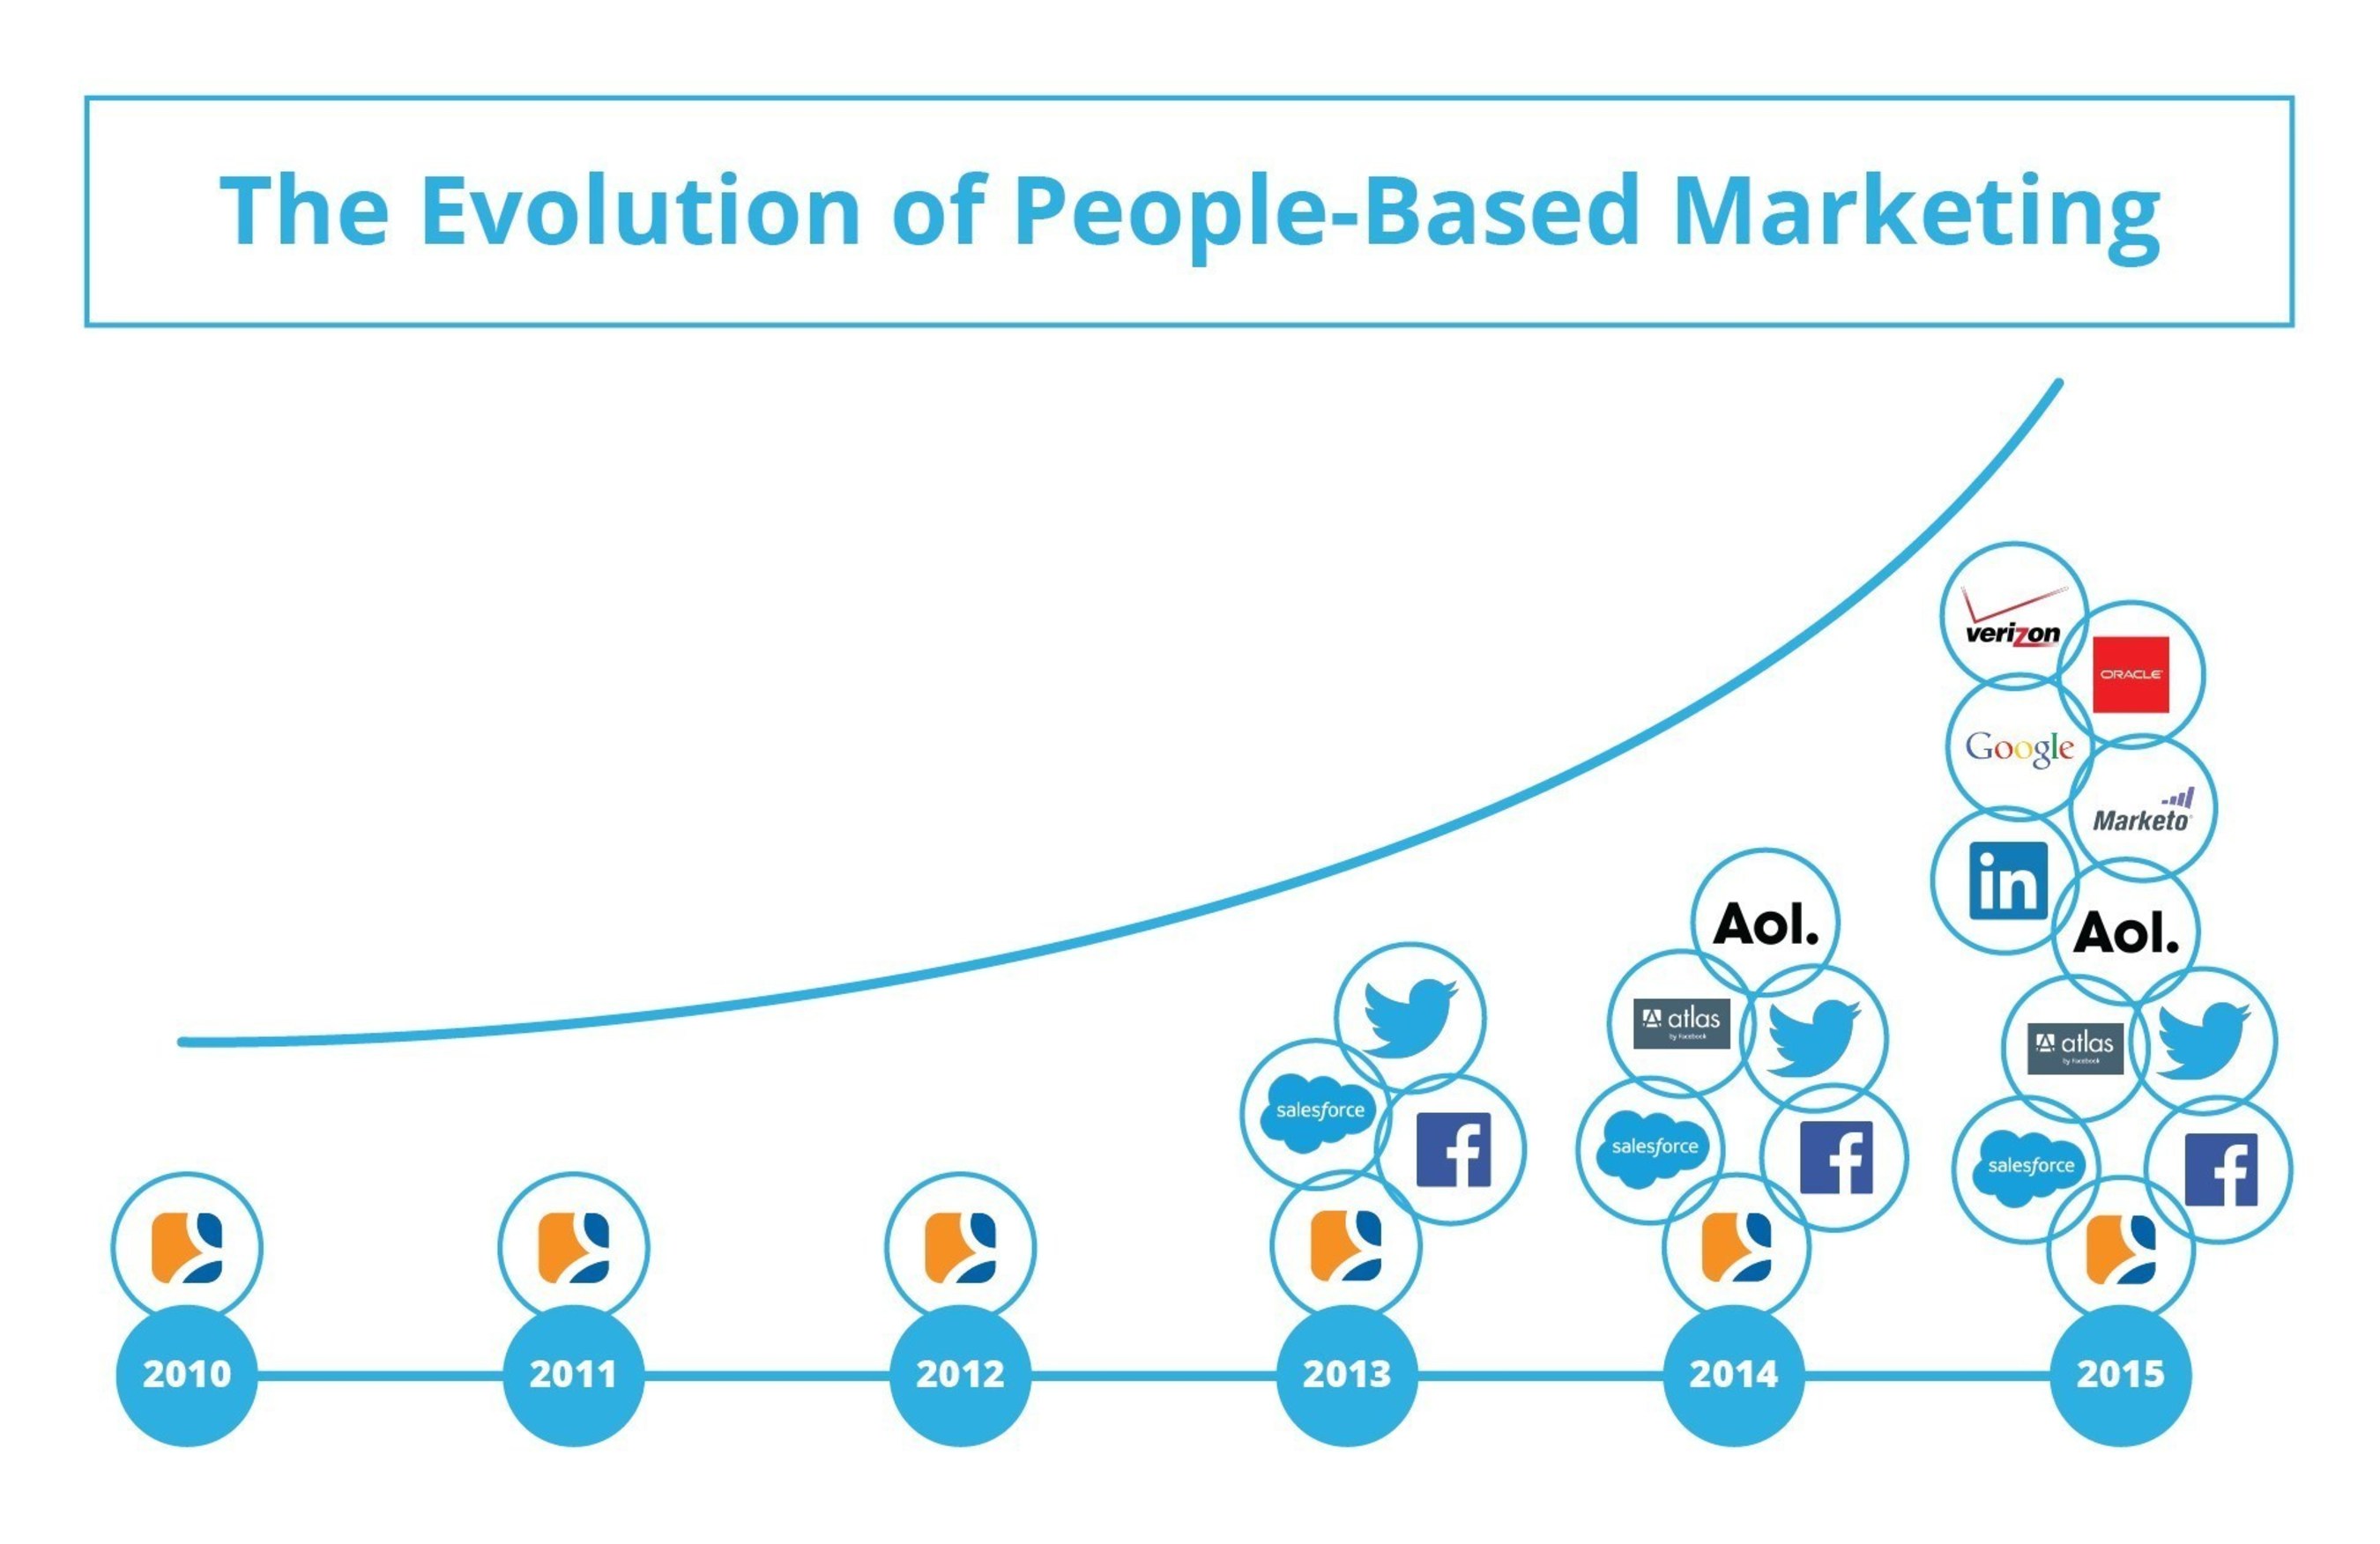 A timeline of the proliferation of People-Based Marketing Solutions